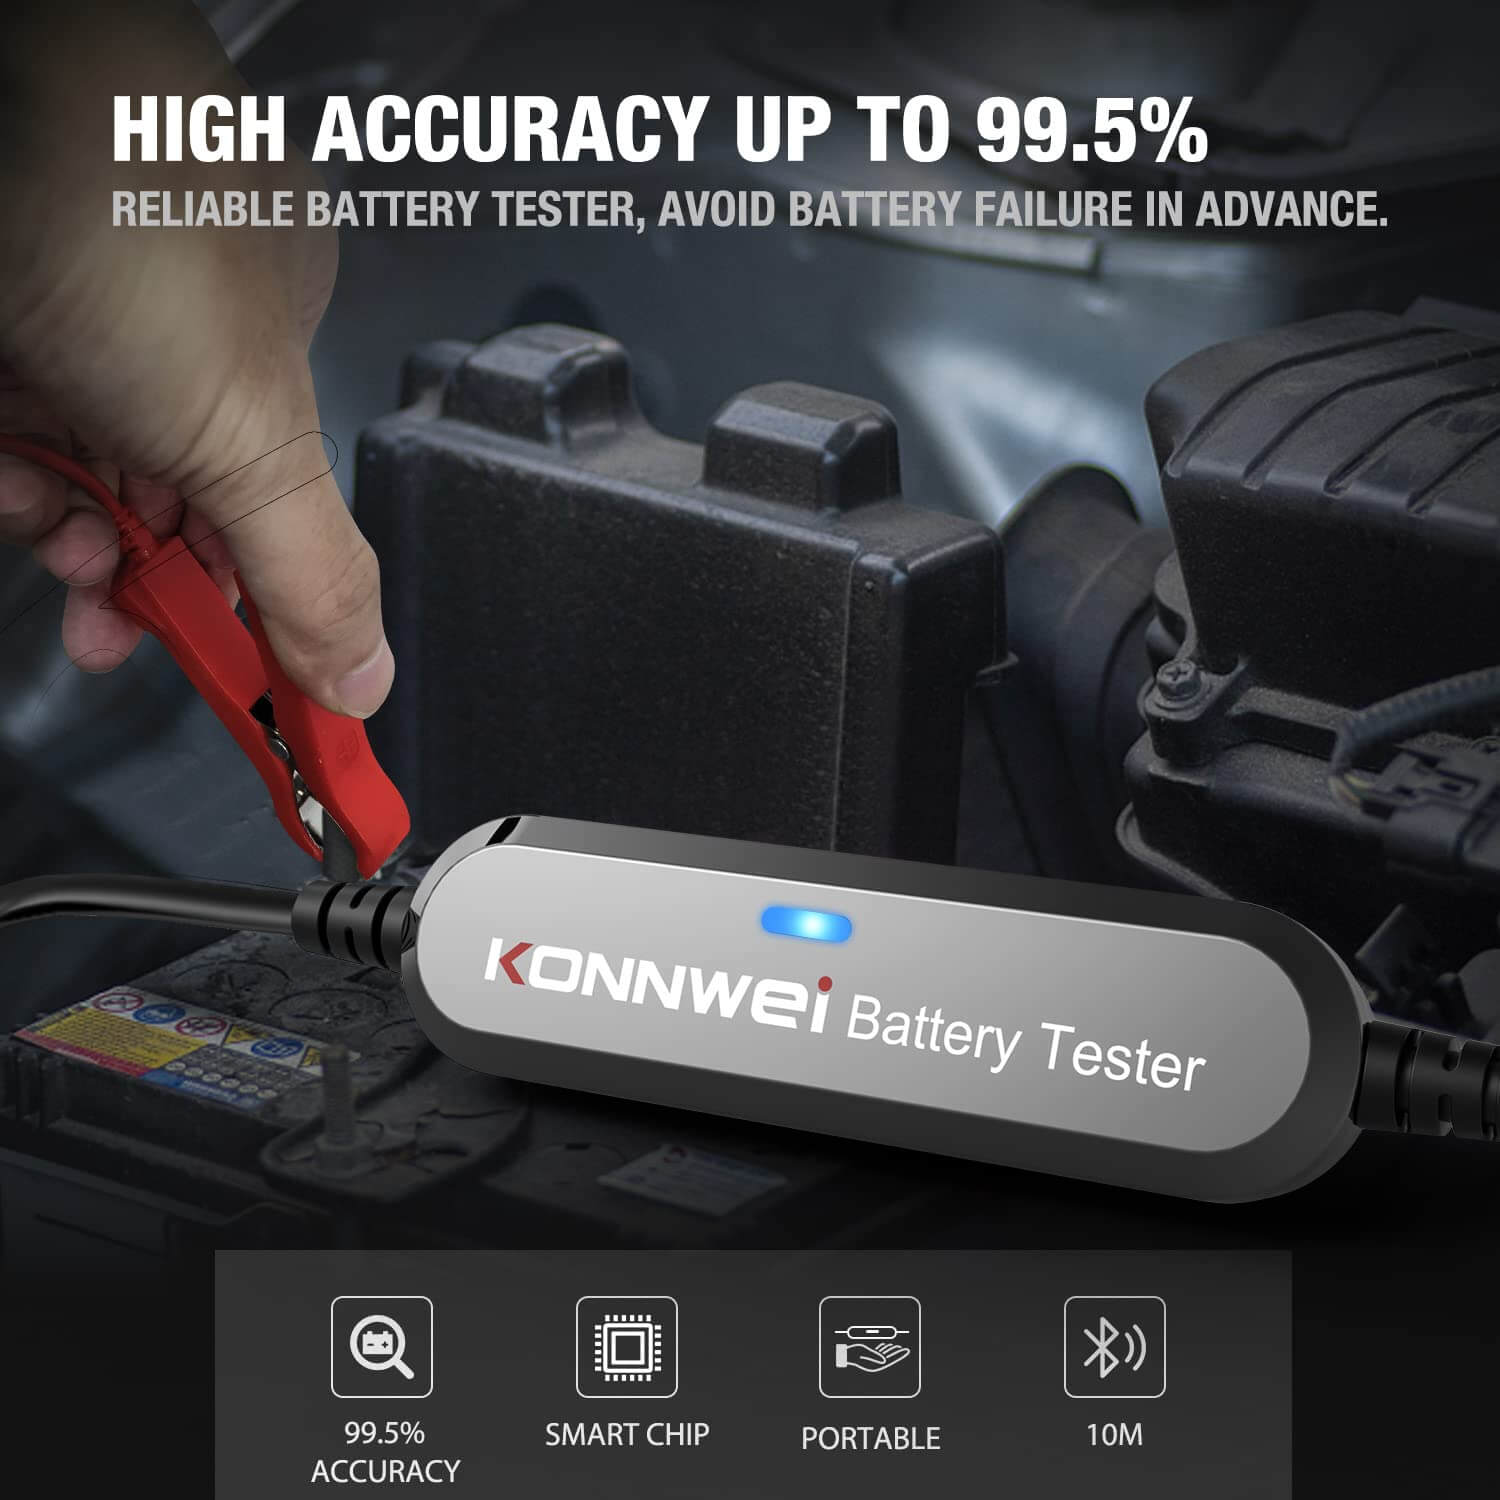 KONNWEI bt battery tester highly accurate